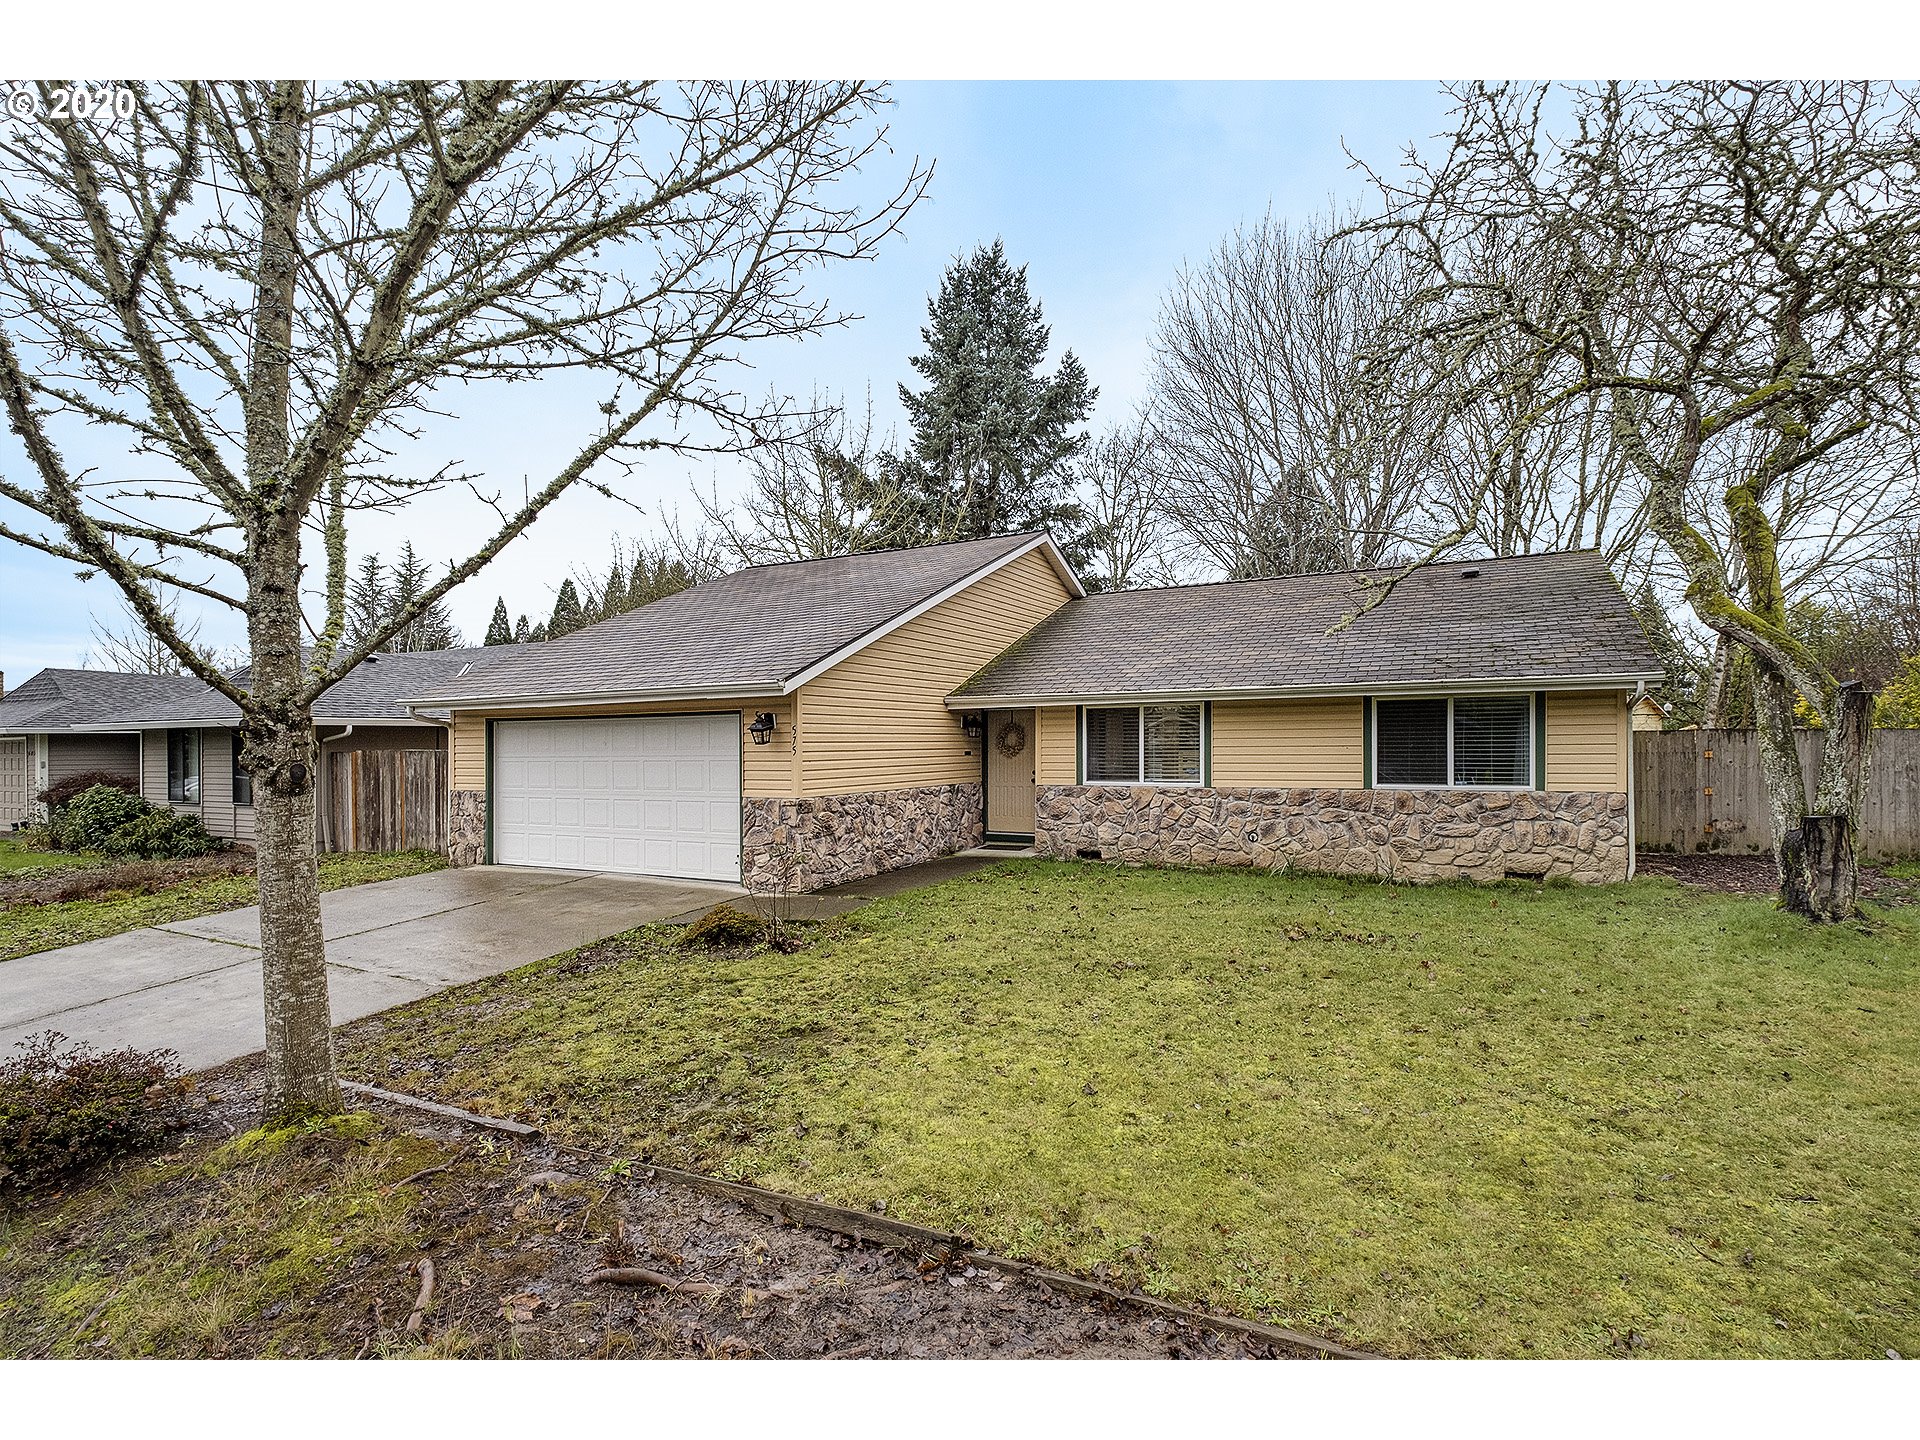 575 SW 194TH AVE (1 of 24)